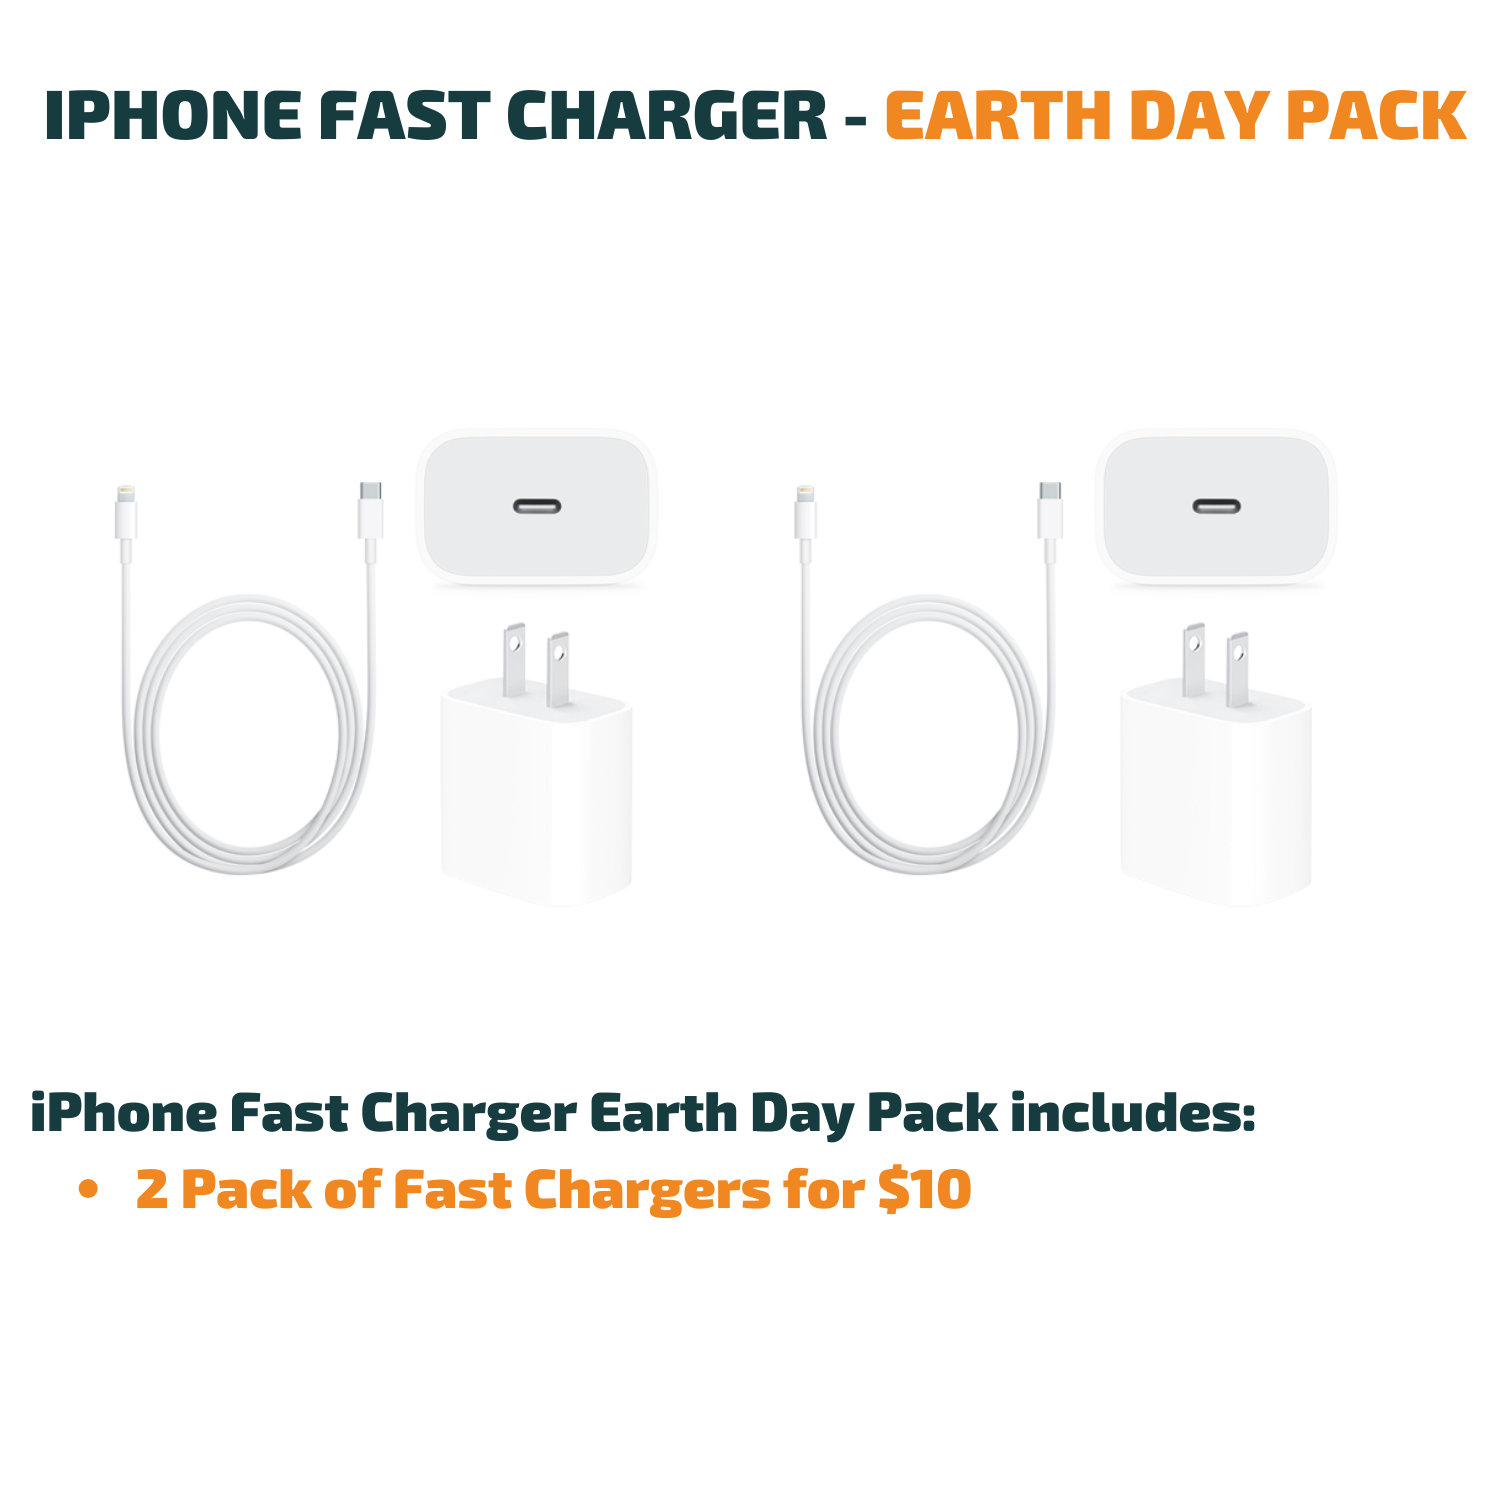 Phone Fast Charger - Earth Day Pack